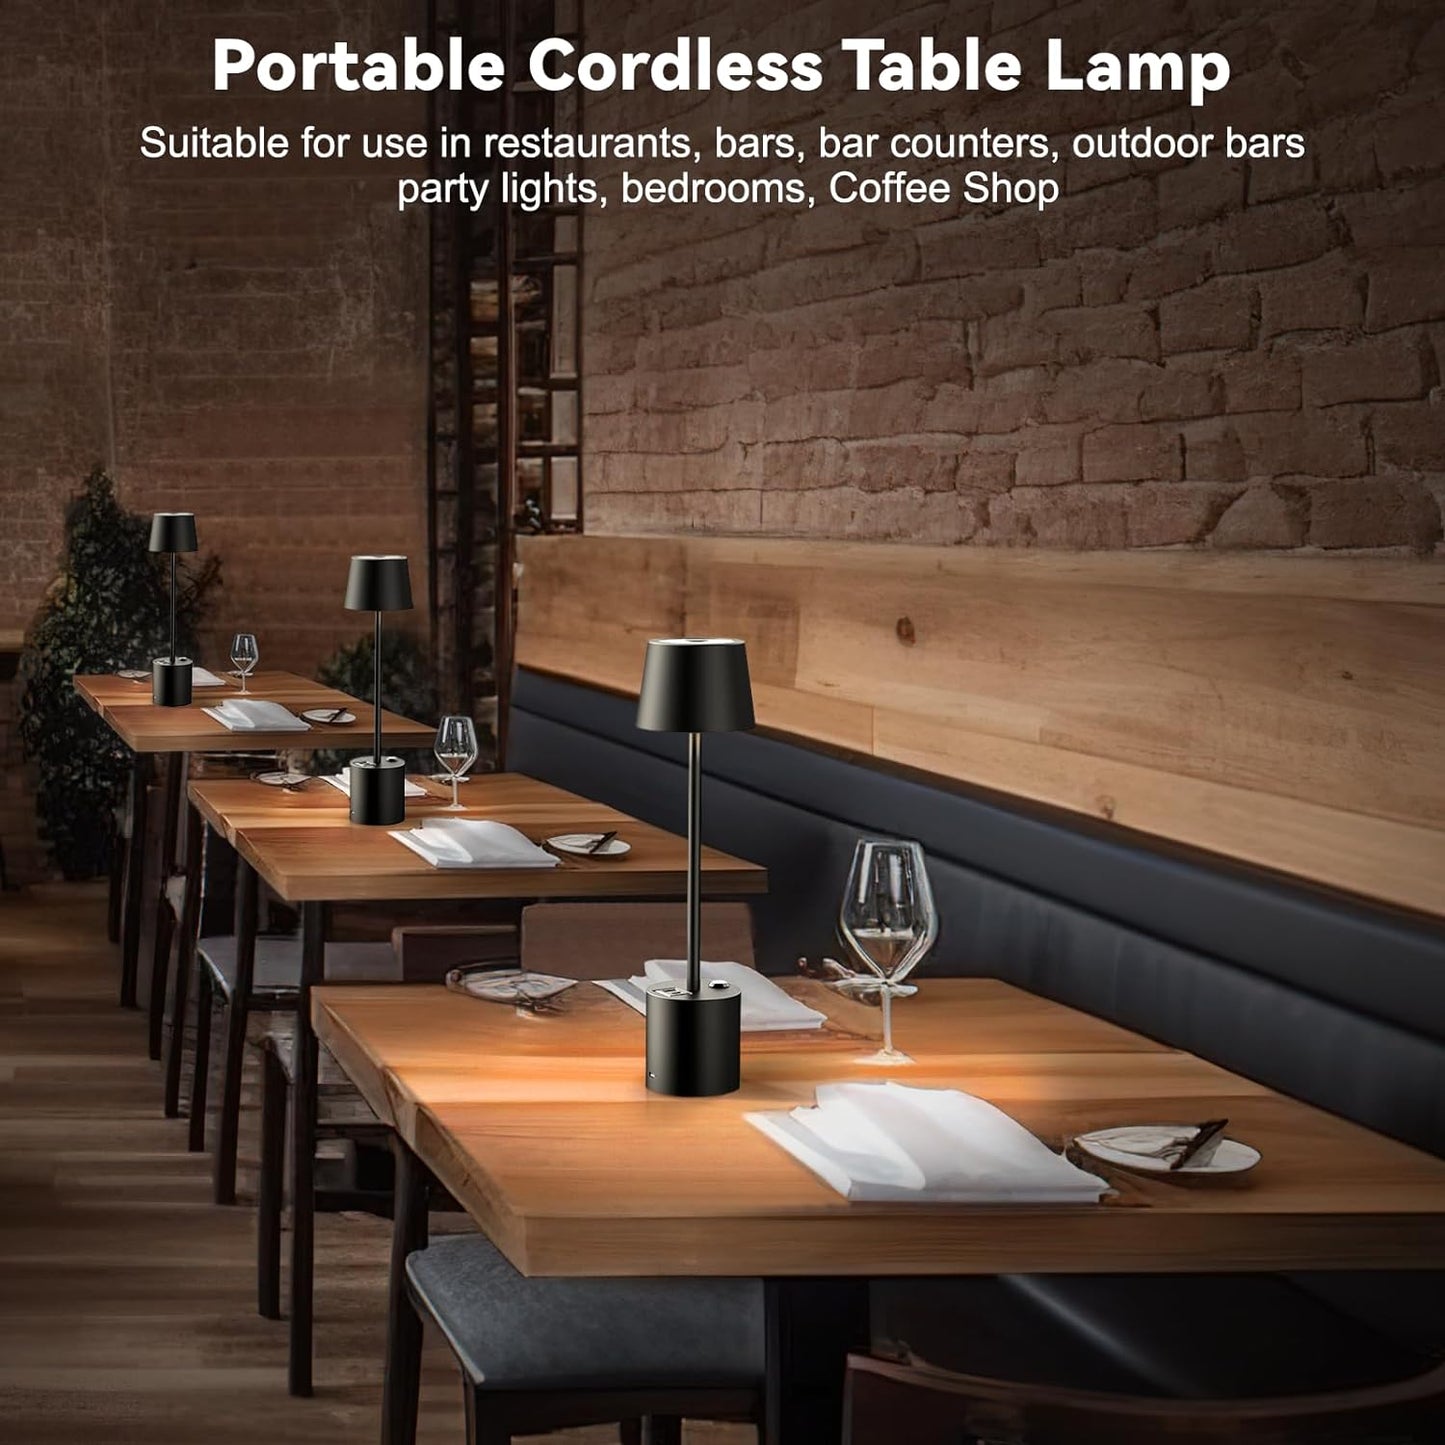 Portable Cordless Led Table lamp - 8000mAh Rechargeable Battery Operated Desk Light: 3 Color Stepless Dimming Up, Wireless Touch Tabletop Lamps for Restaurant Bedroom Bars Outdoor Party Coffee